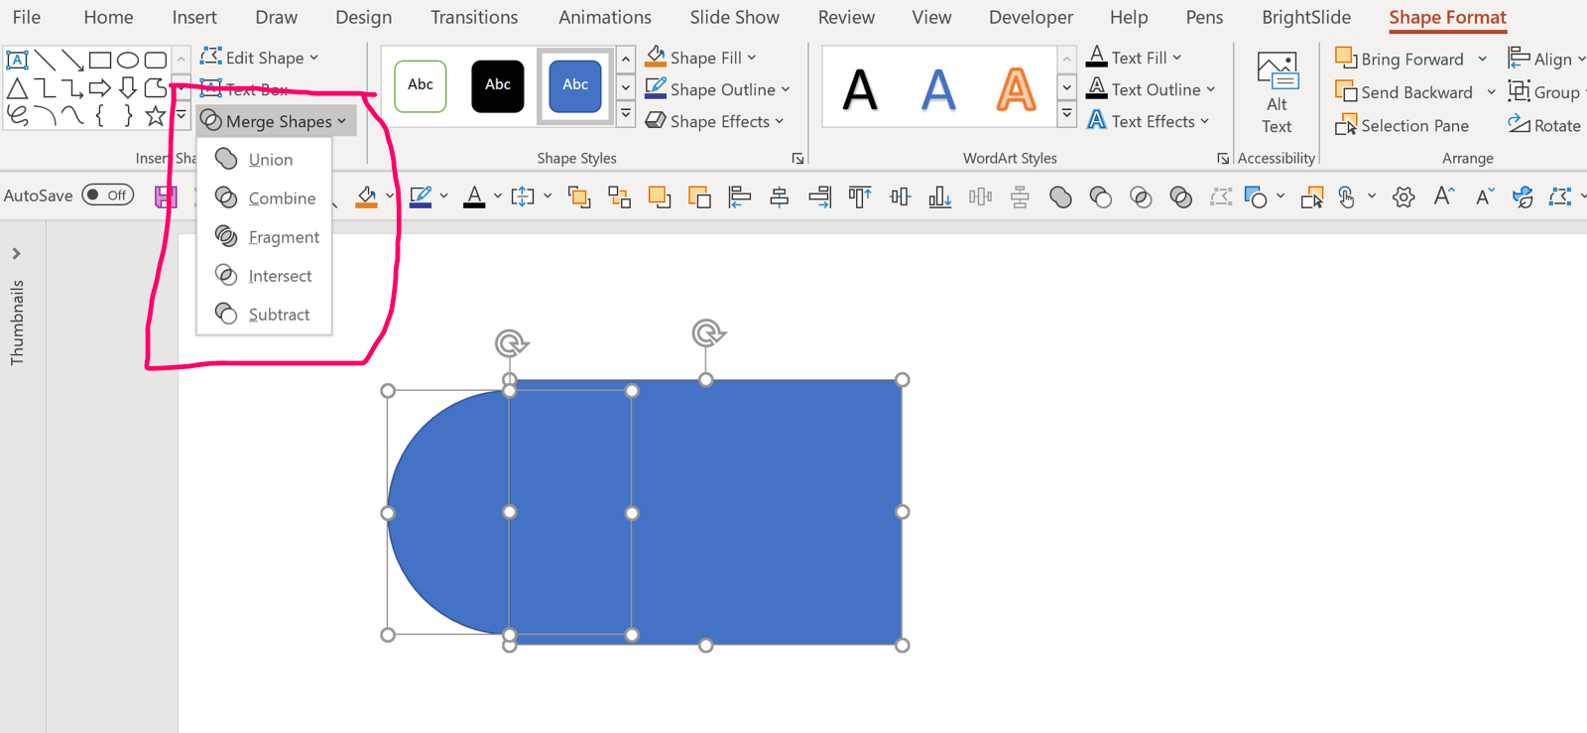 PowerPoint screenshot showing the Merge shapes tools